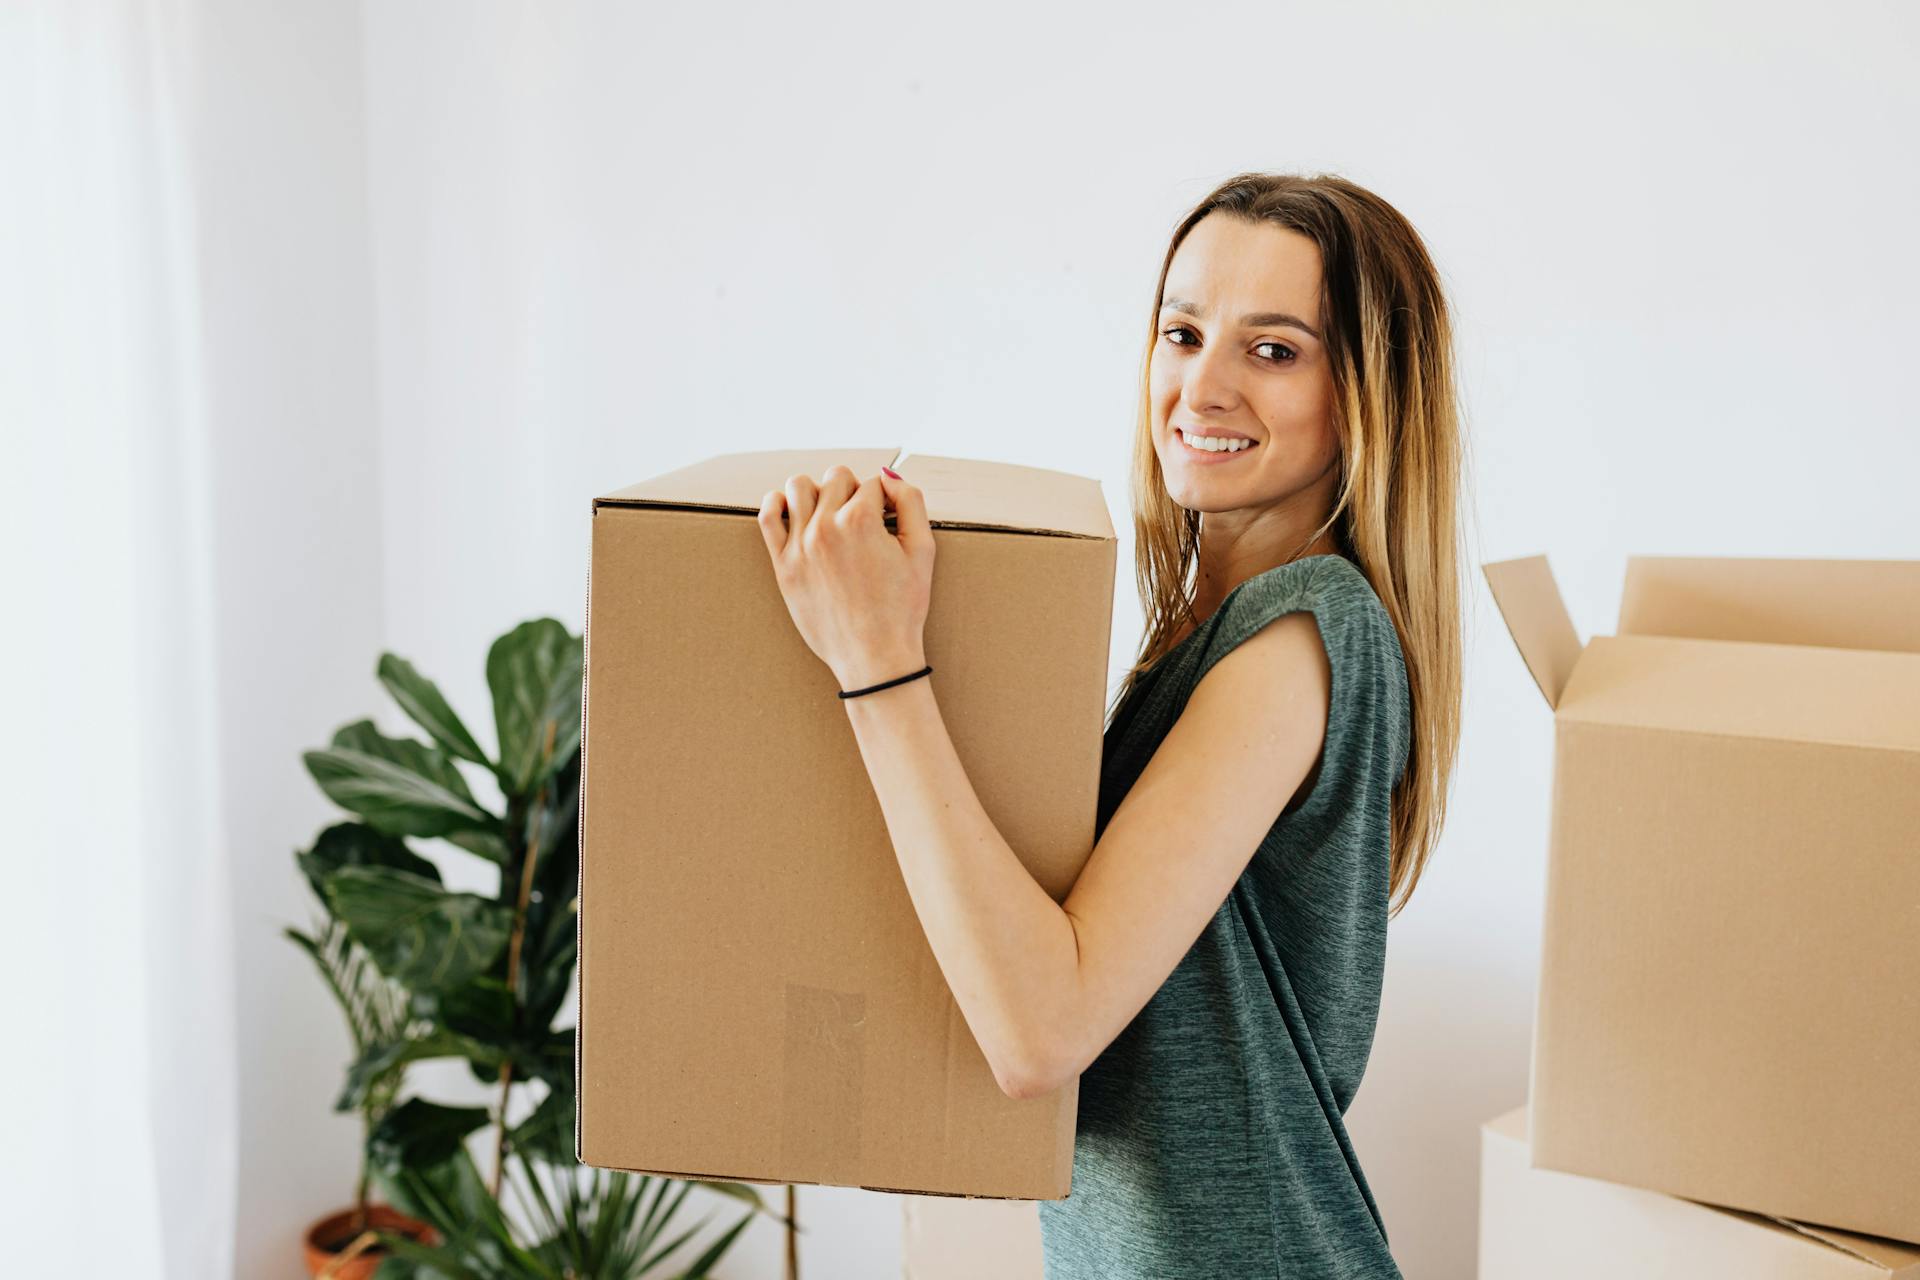 Cheerful woman carrying packed carton box